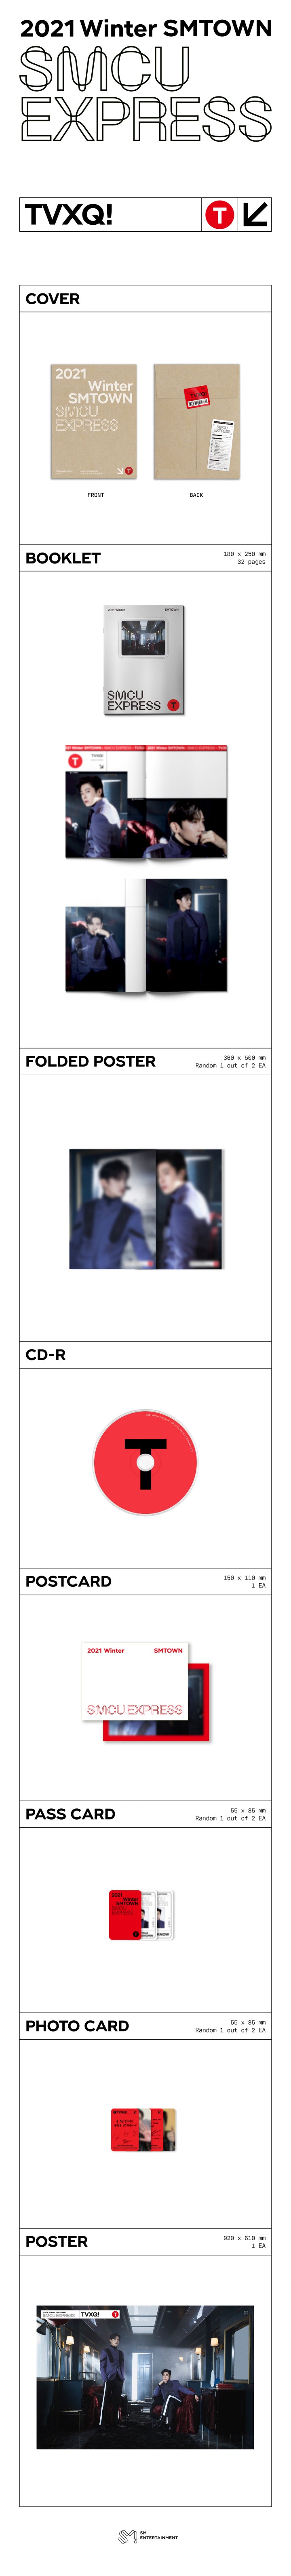 1 CD
1 Booklet (32 pages)
1 Folded Poster (random out of 2 types)
1 Postcard
1 Pass Card (random out of 2 types)
1 Photo C...